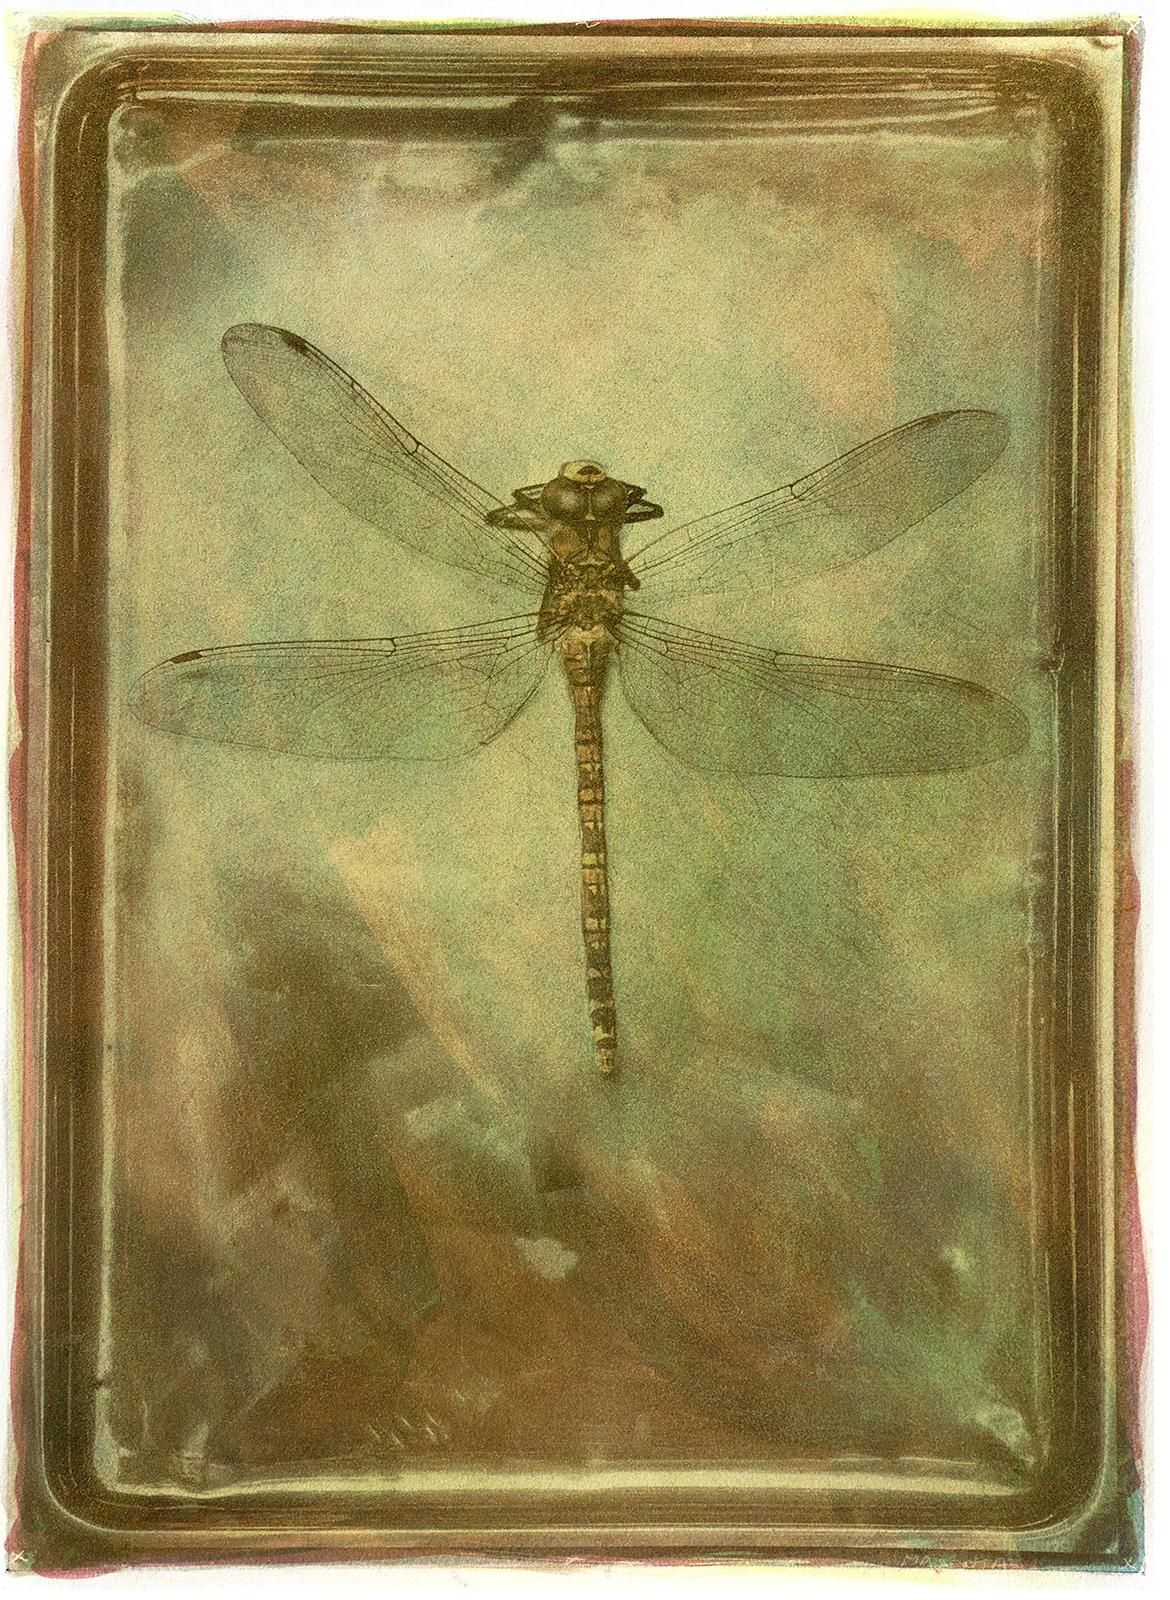 Dragonfly - Signed limited edition archival pigment print  -   Edition of 8  
Photography  and Bichromate print : 2016
Pigment print : 2020

Several negatives was used to create a handmade print with a 19th. century technique involving light